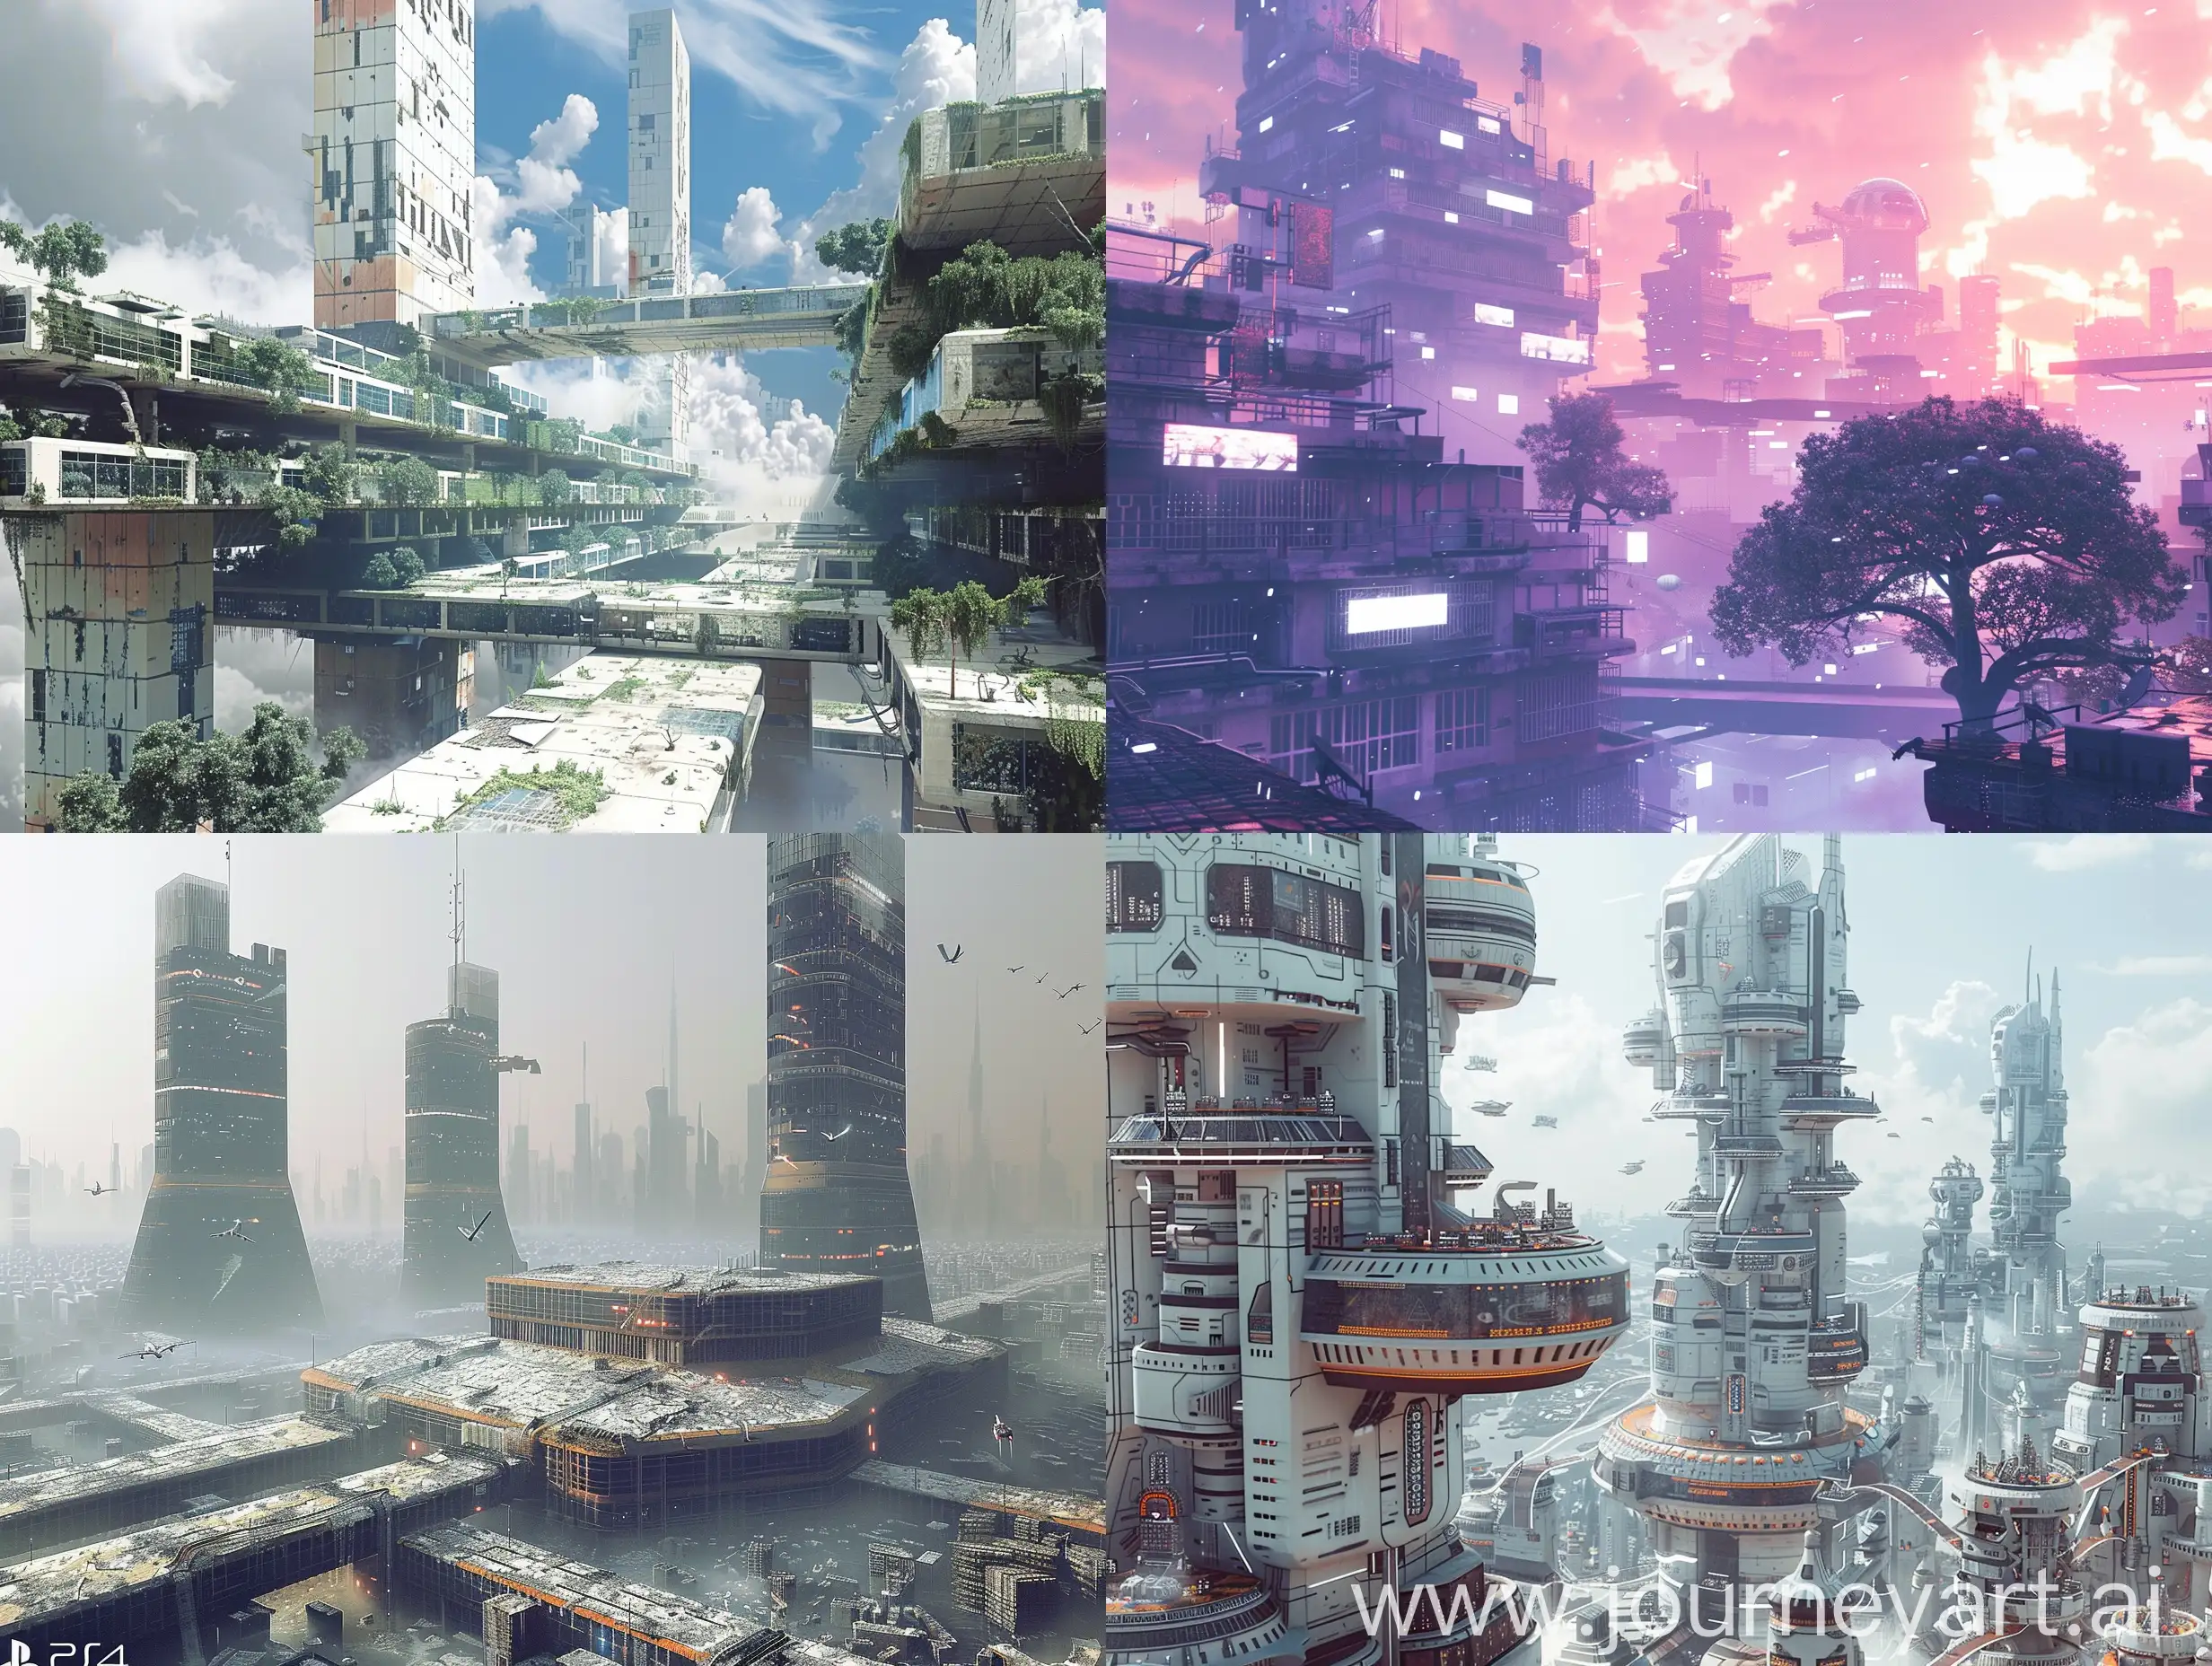 a city, genre, retro, modern, futurism, y2k aesthetic, nostalgic trend, environment, old PlayStation 2 early 2000s graphics, render, old video game, old graphics, utopian, dystopian, ethereal,
